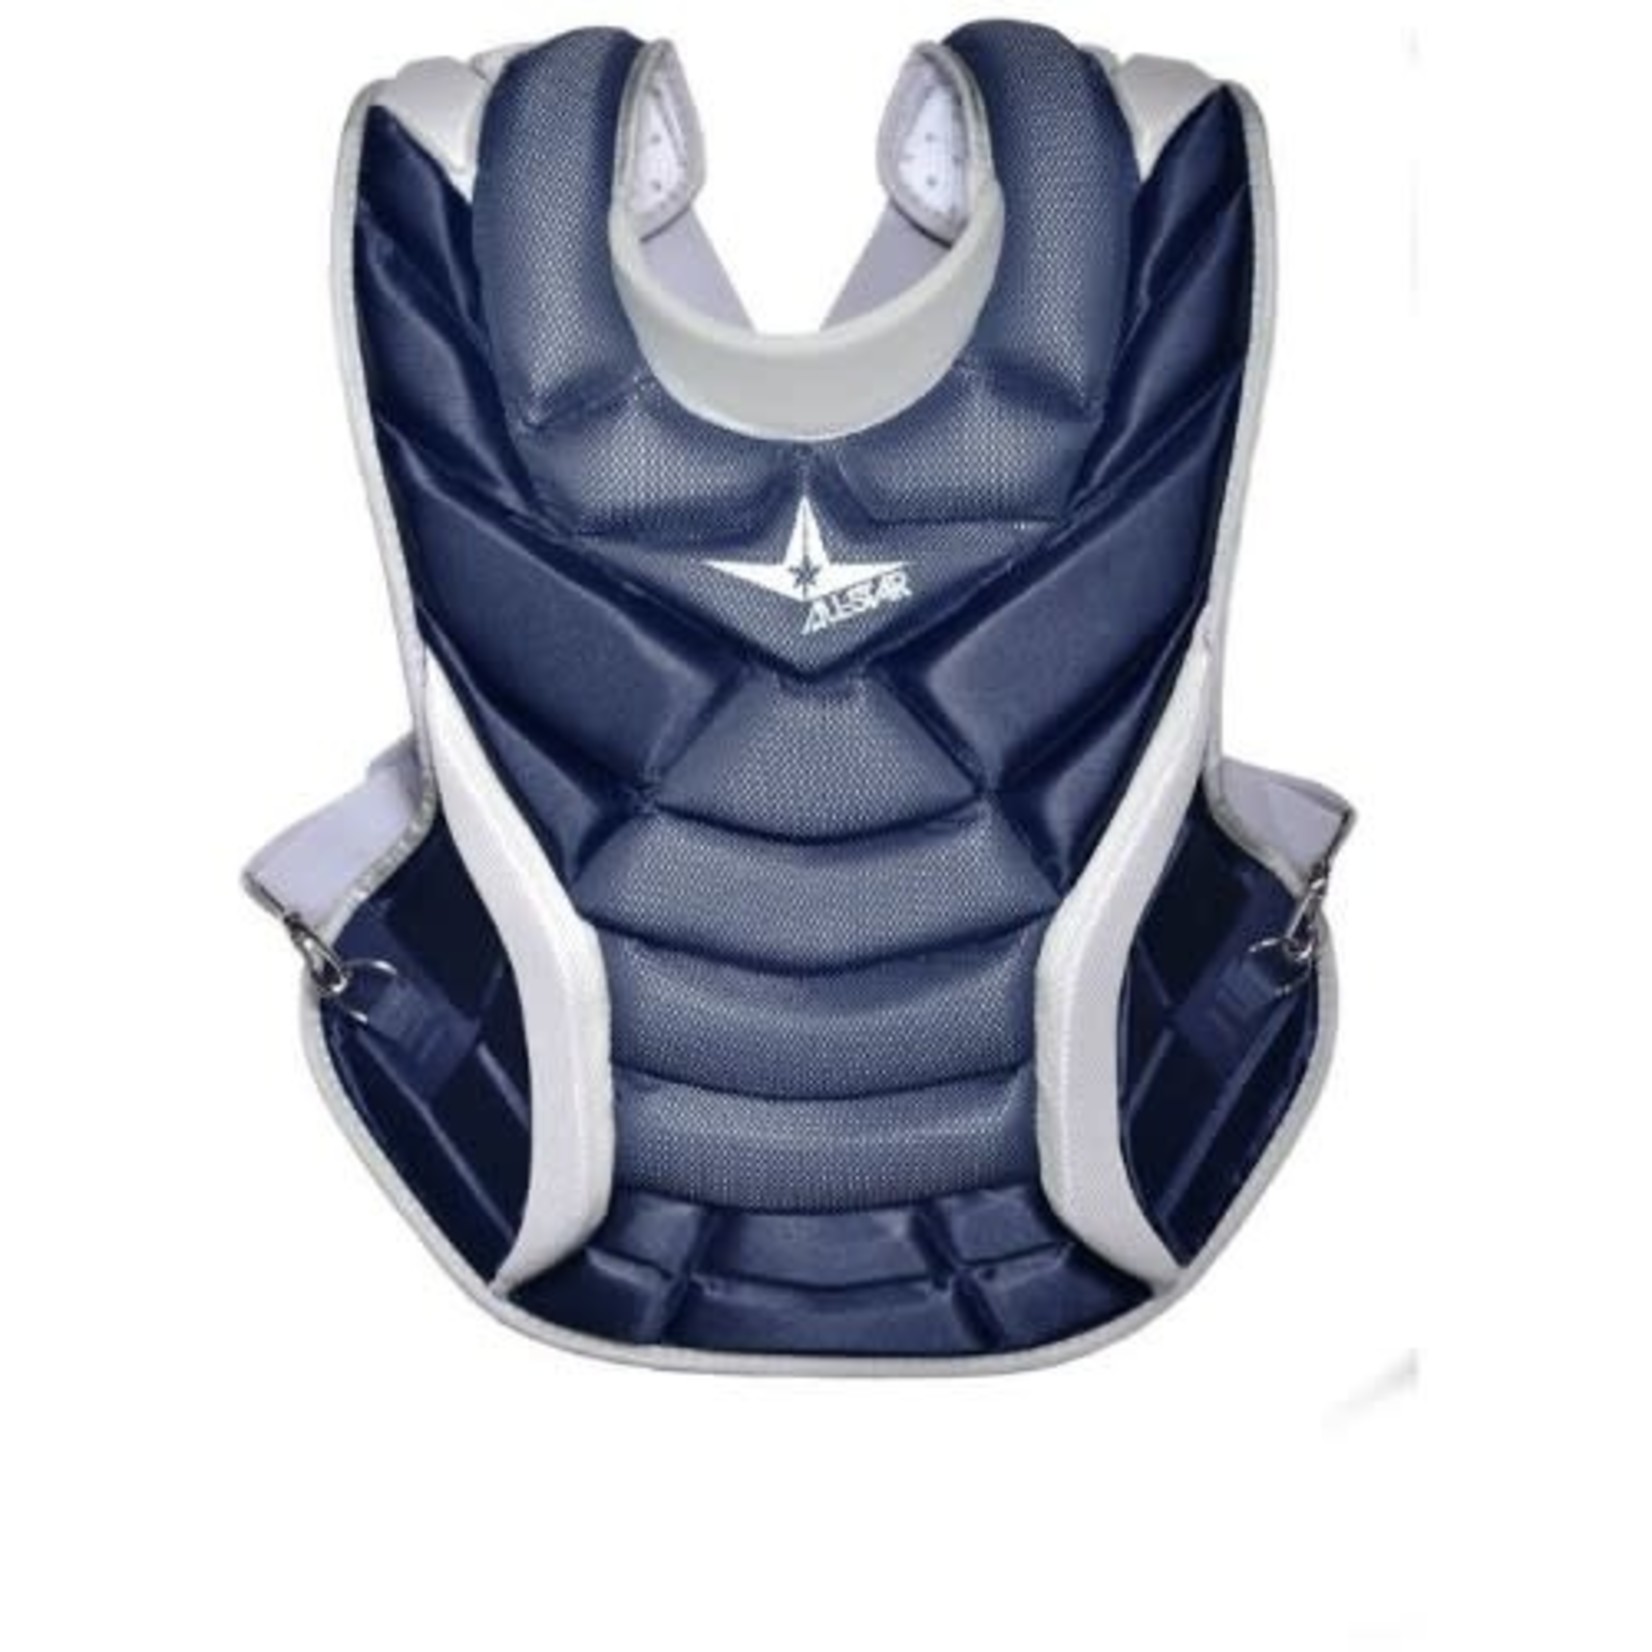 All Star All-star Vela Professional Fastpitch 14.5" Chest Protector